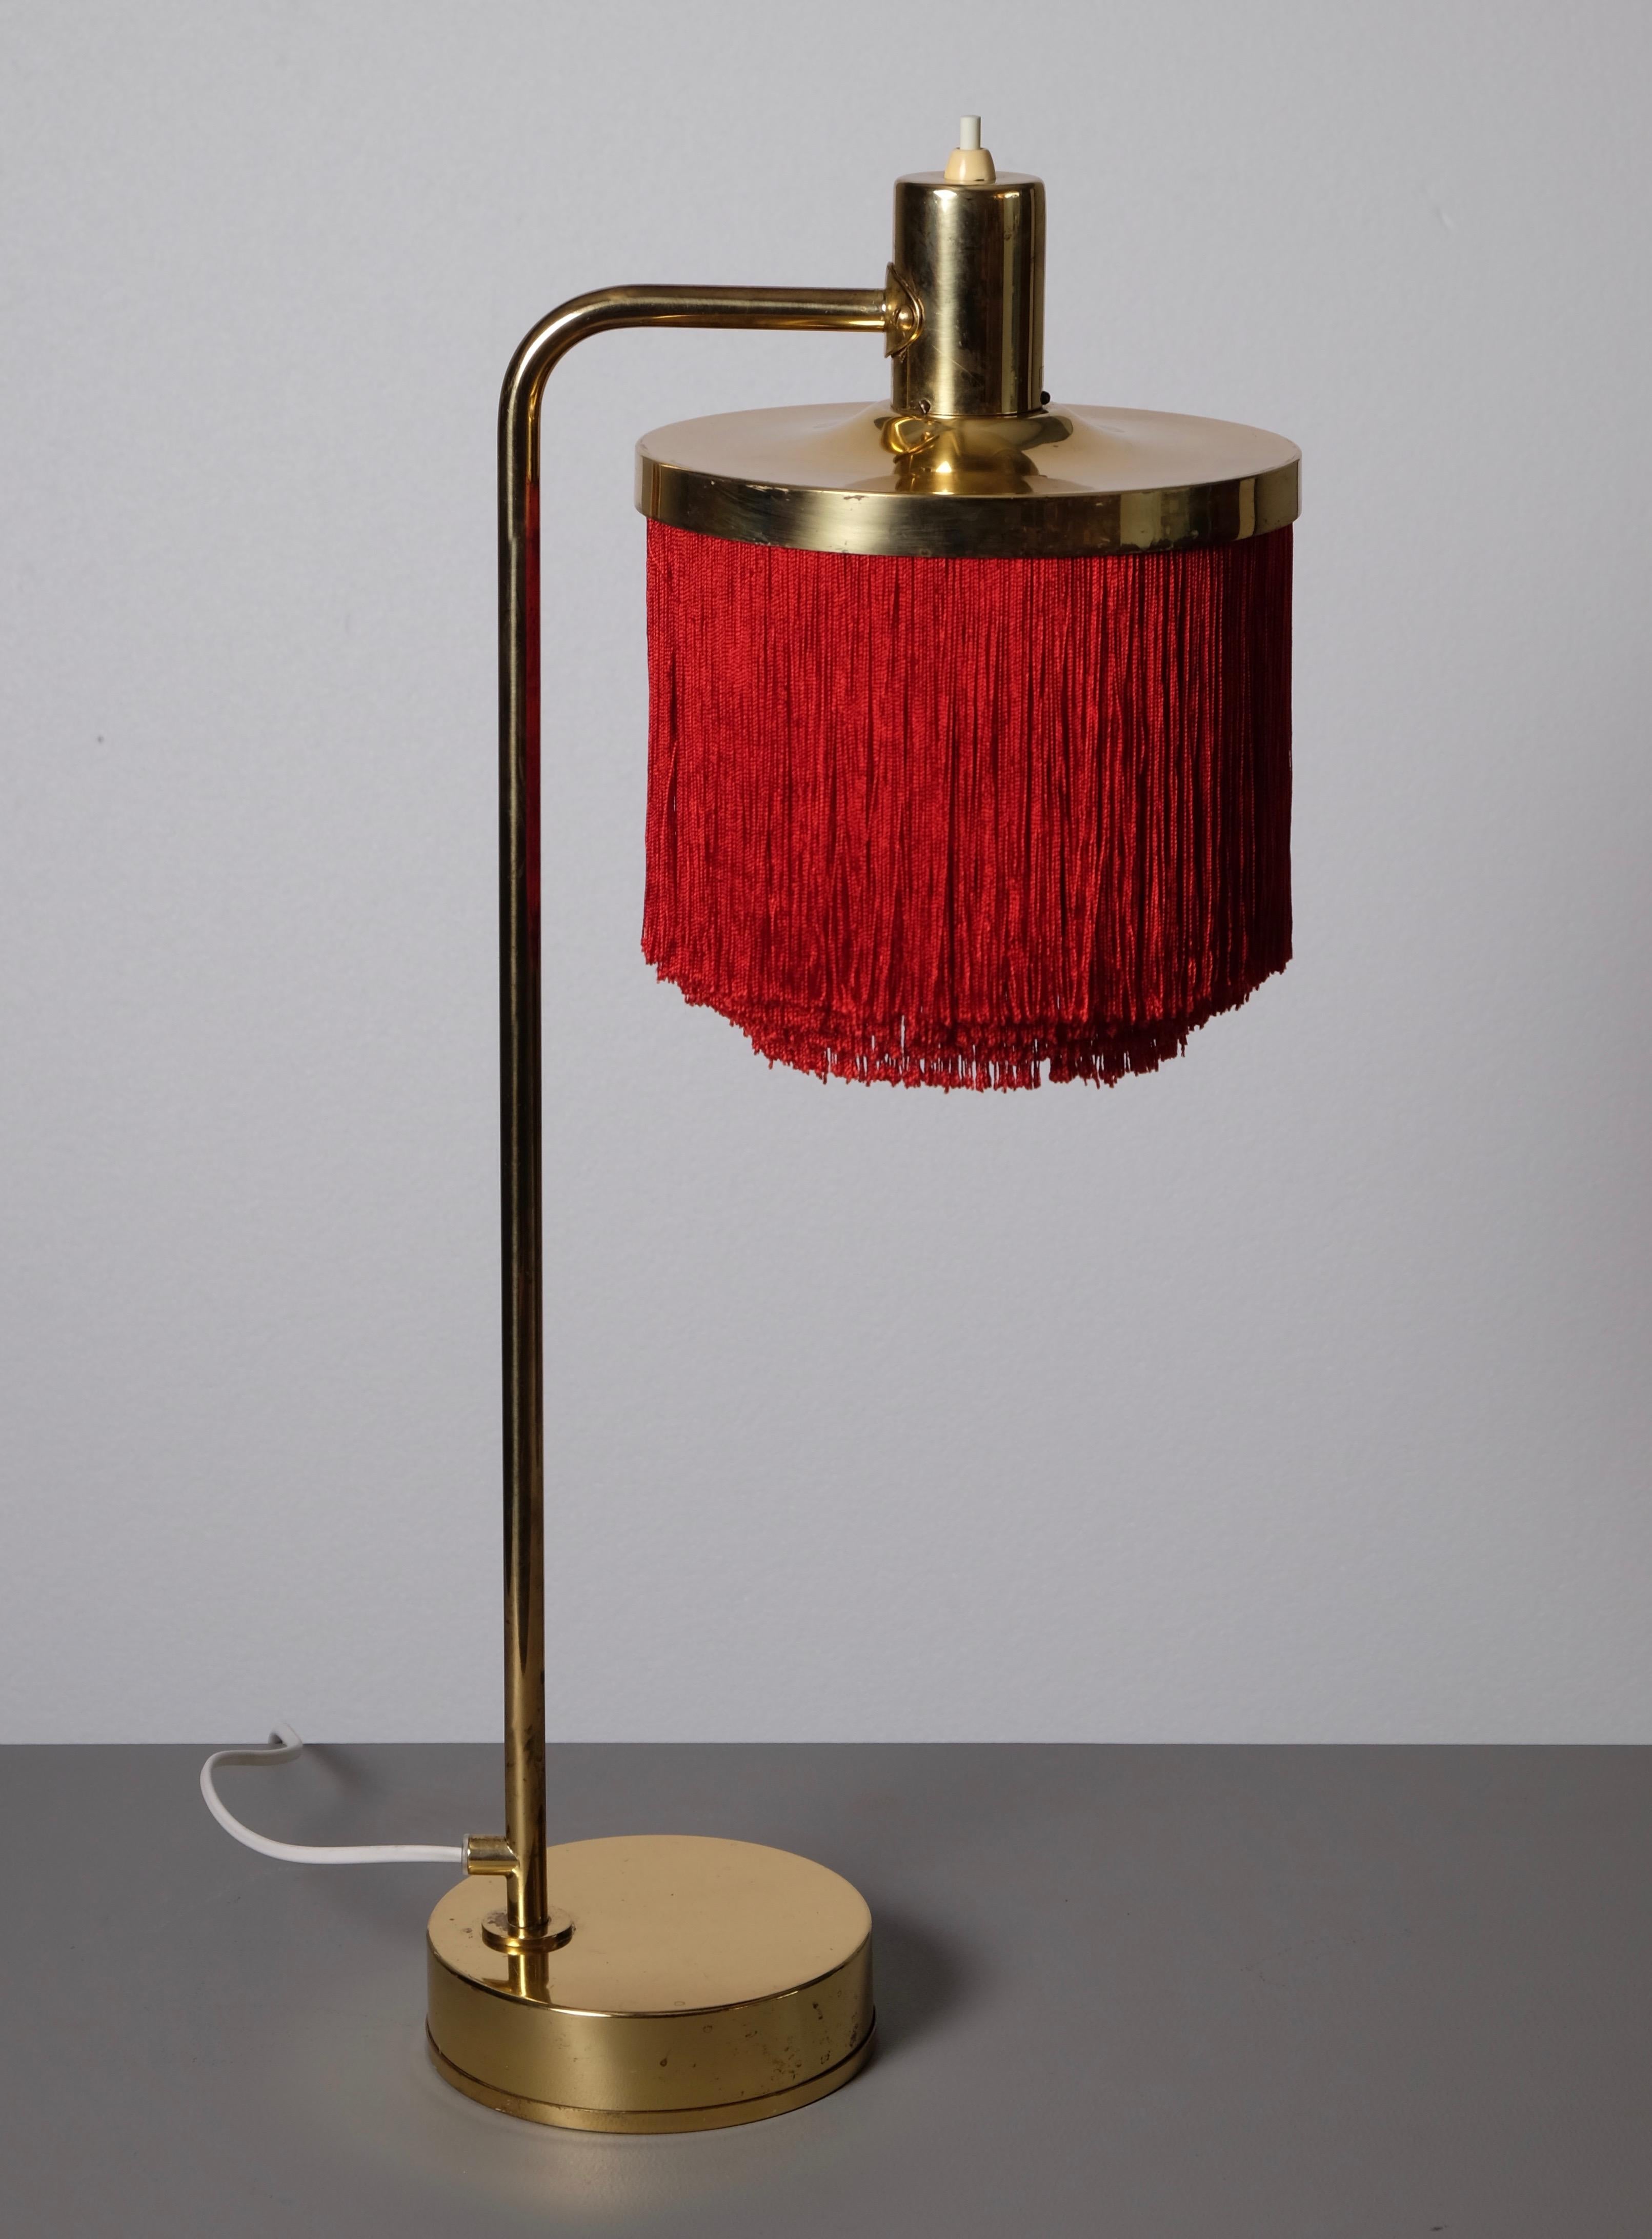 Brass table lamp with red fringes produced by Hans-Agne Jakobsson in Markaryd, Sweden, 1960s.
New wiring.